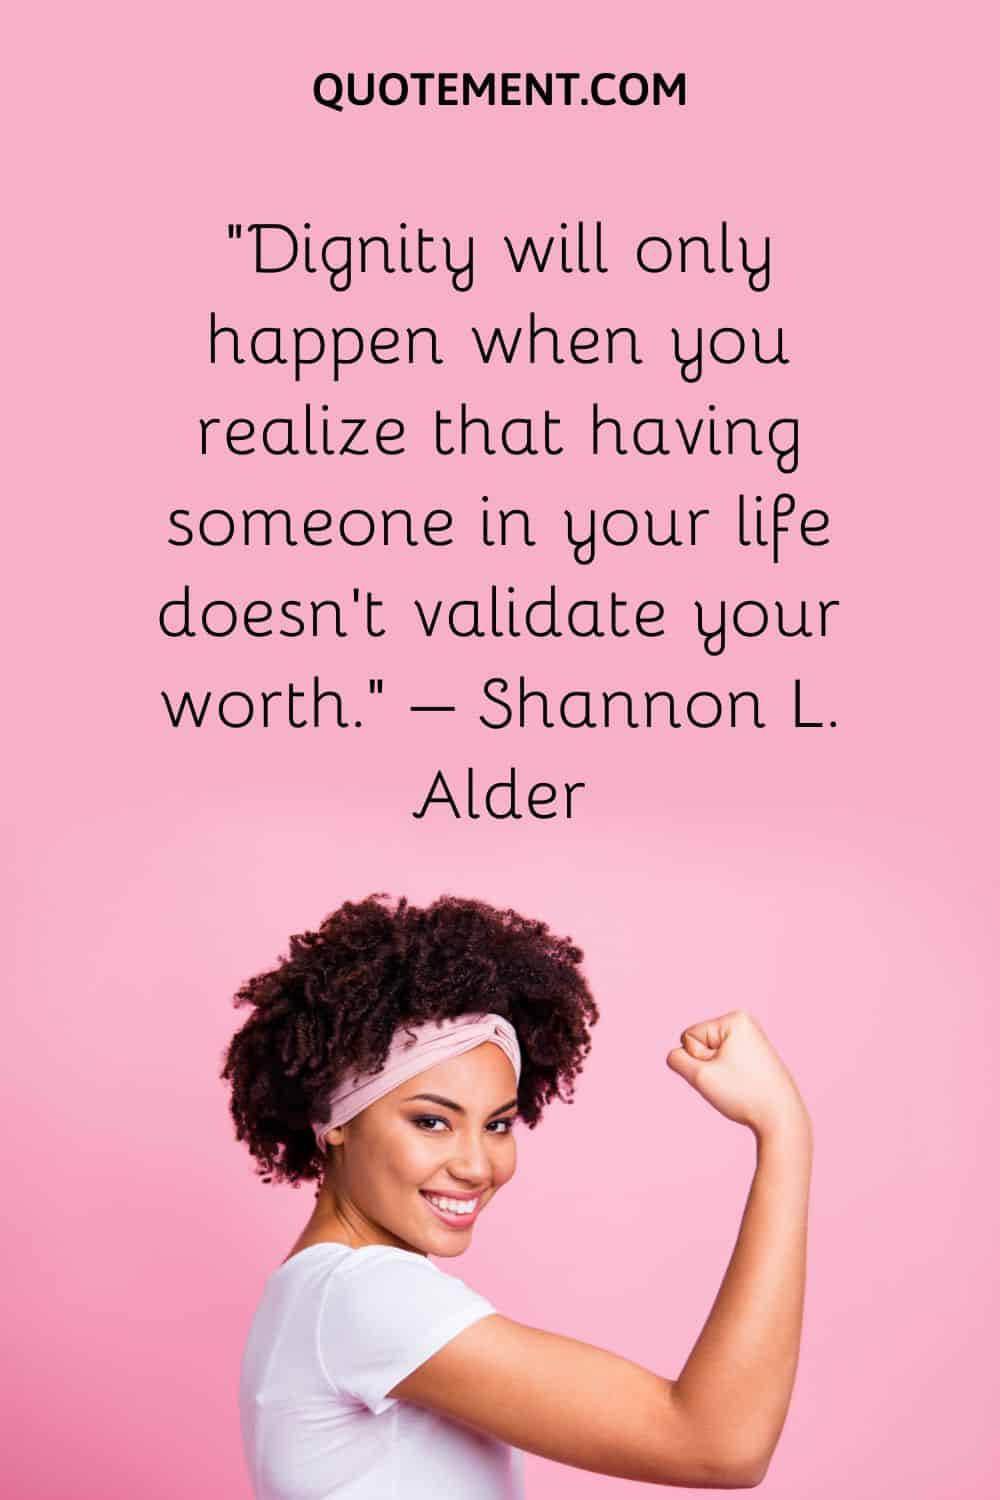 Dignity will only happen when you realize that having someone in your life doesn’t validate your worth